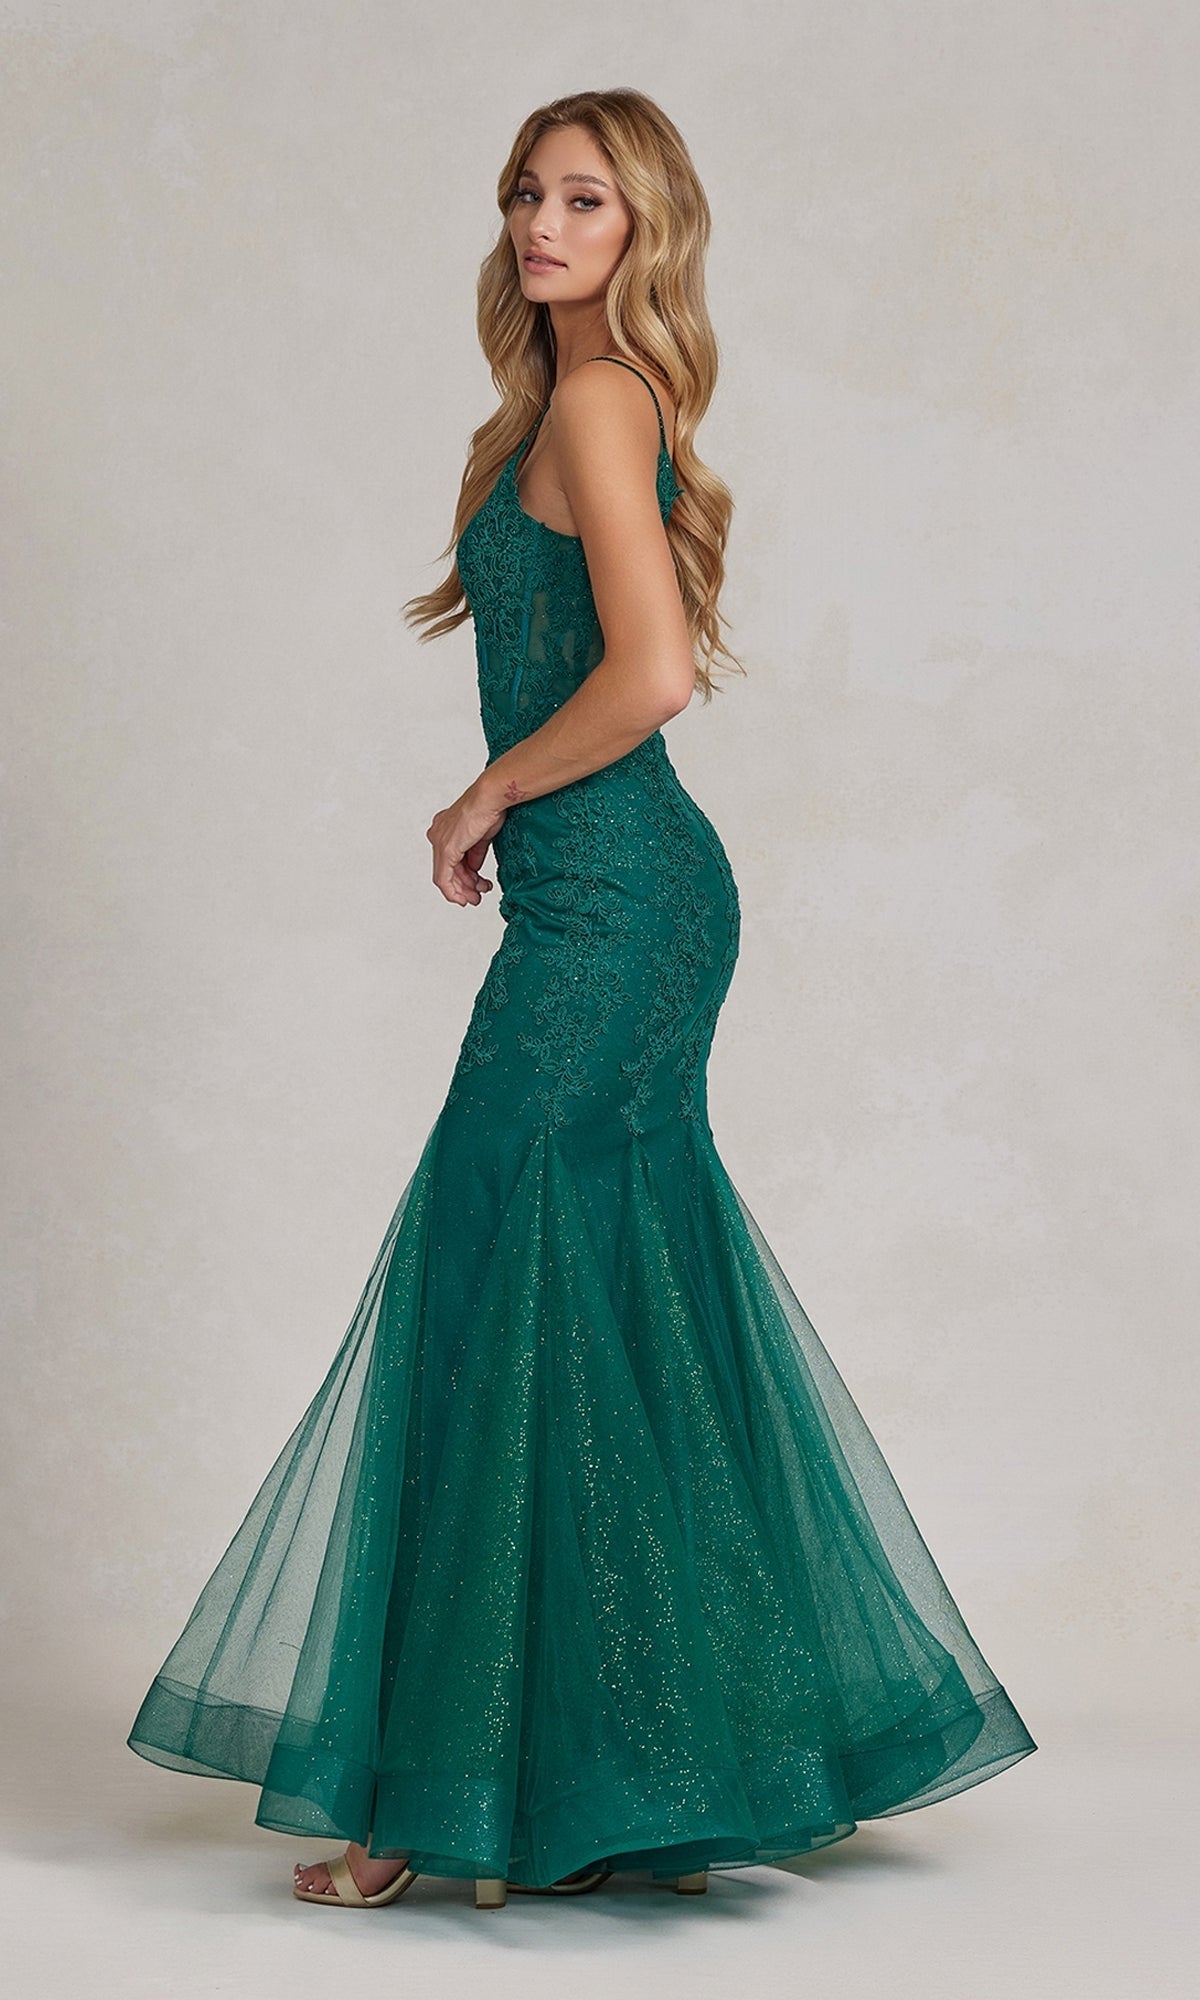  Sheer-Corset-Bodice Long Mermaid Prom Gown P1170